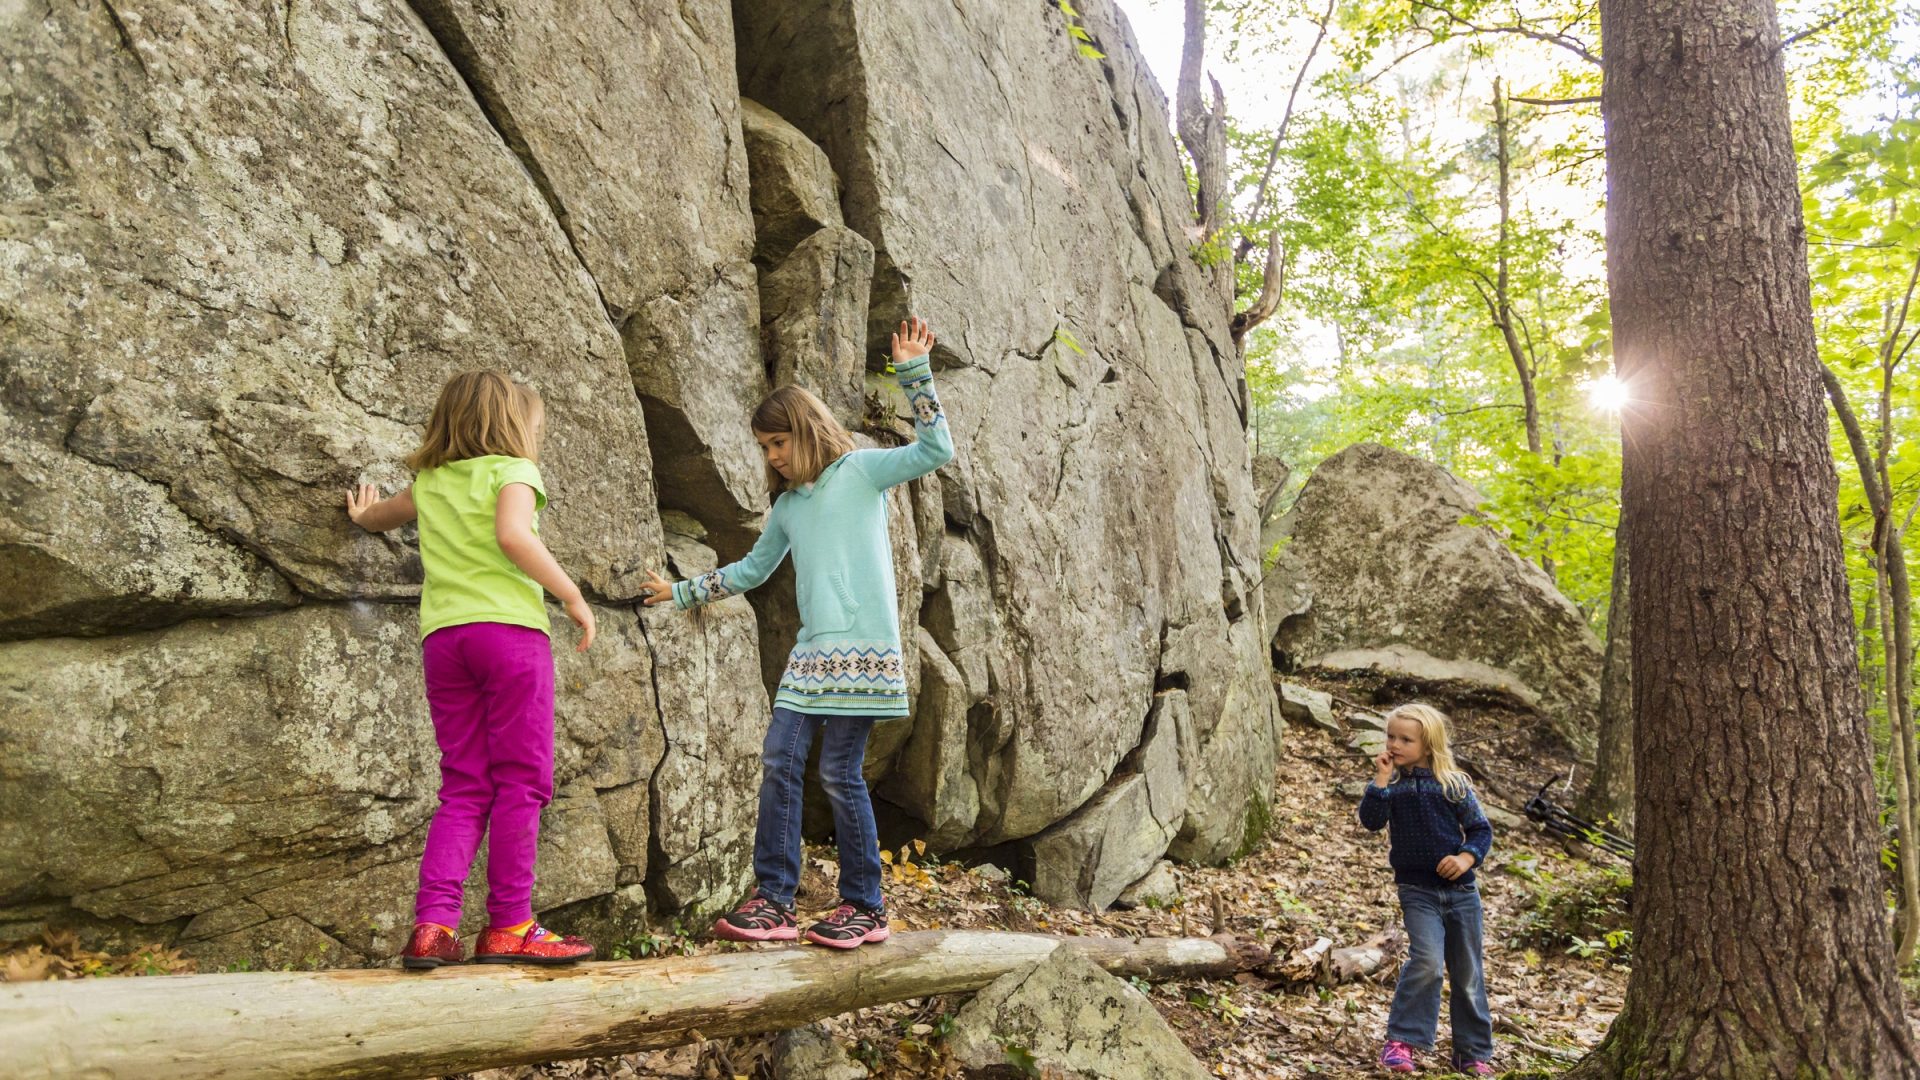 Kids attempt to traverse a log next to a cliff in the forest at the Kenyon Hill preserve in South Berwick, Maine.